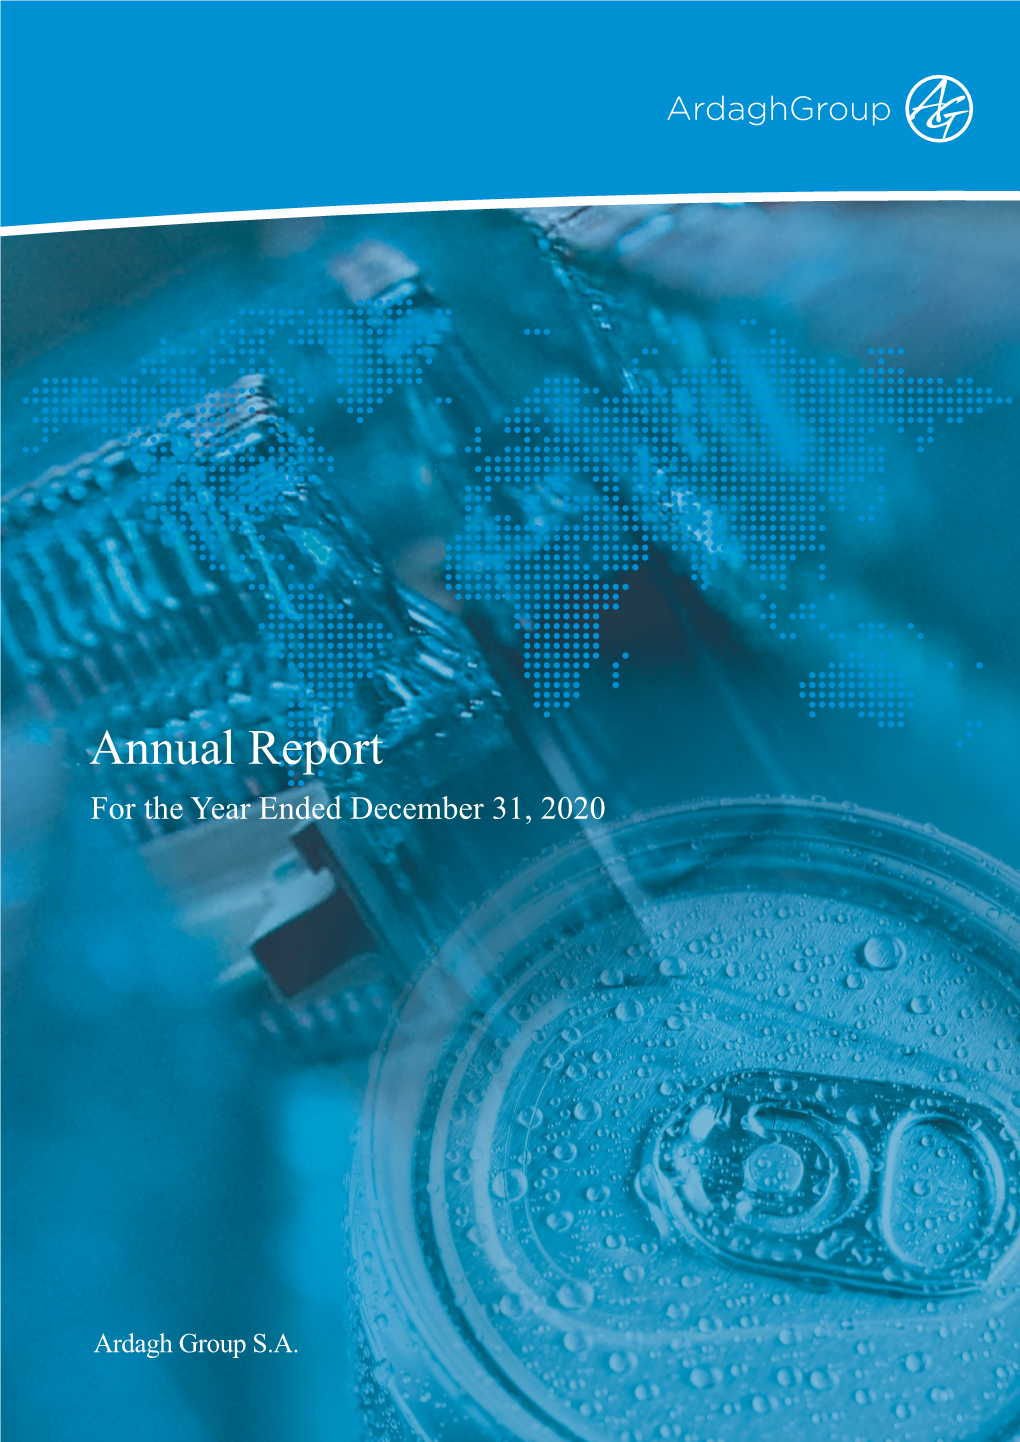 Annual Report for the Year Ended December 31, 2020